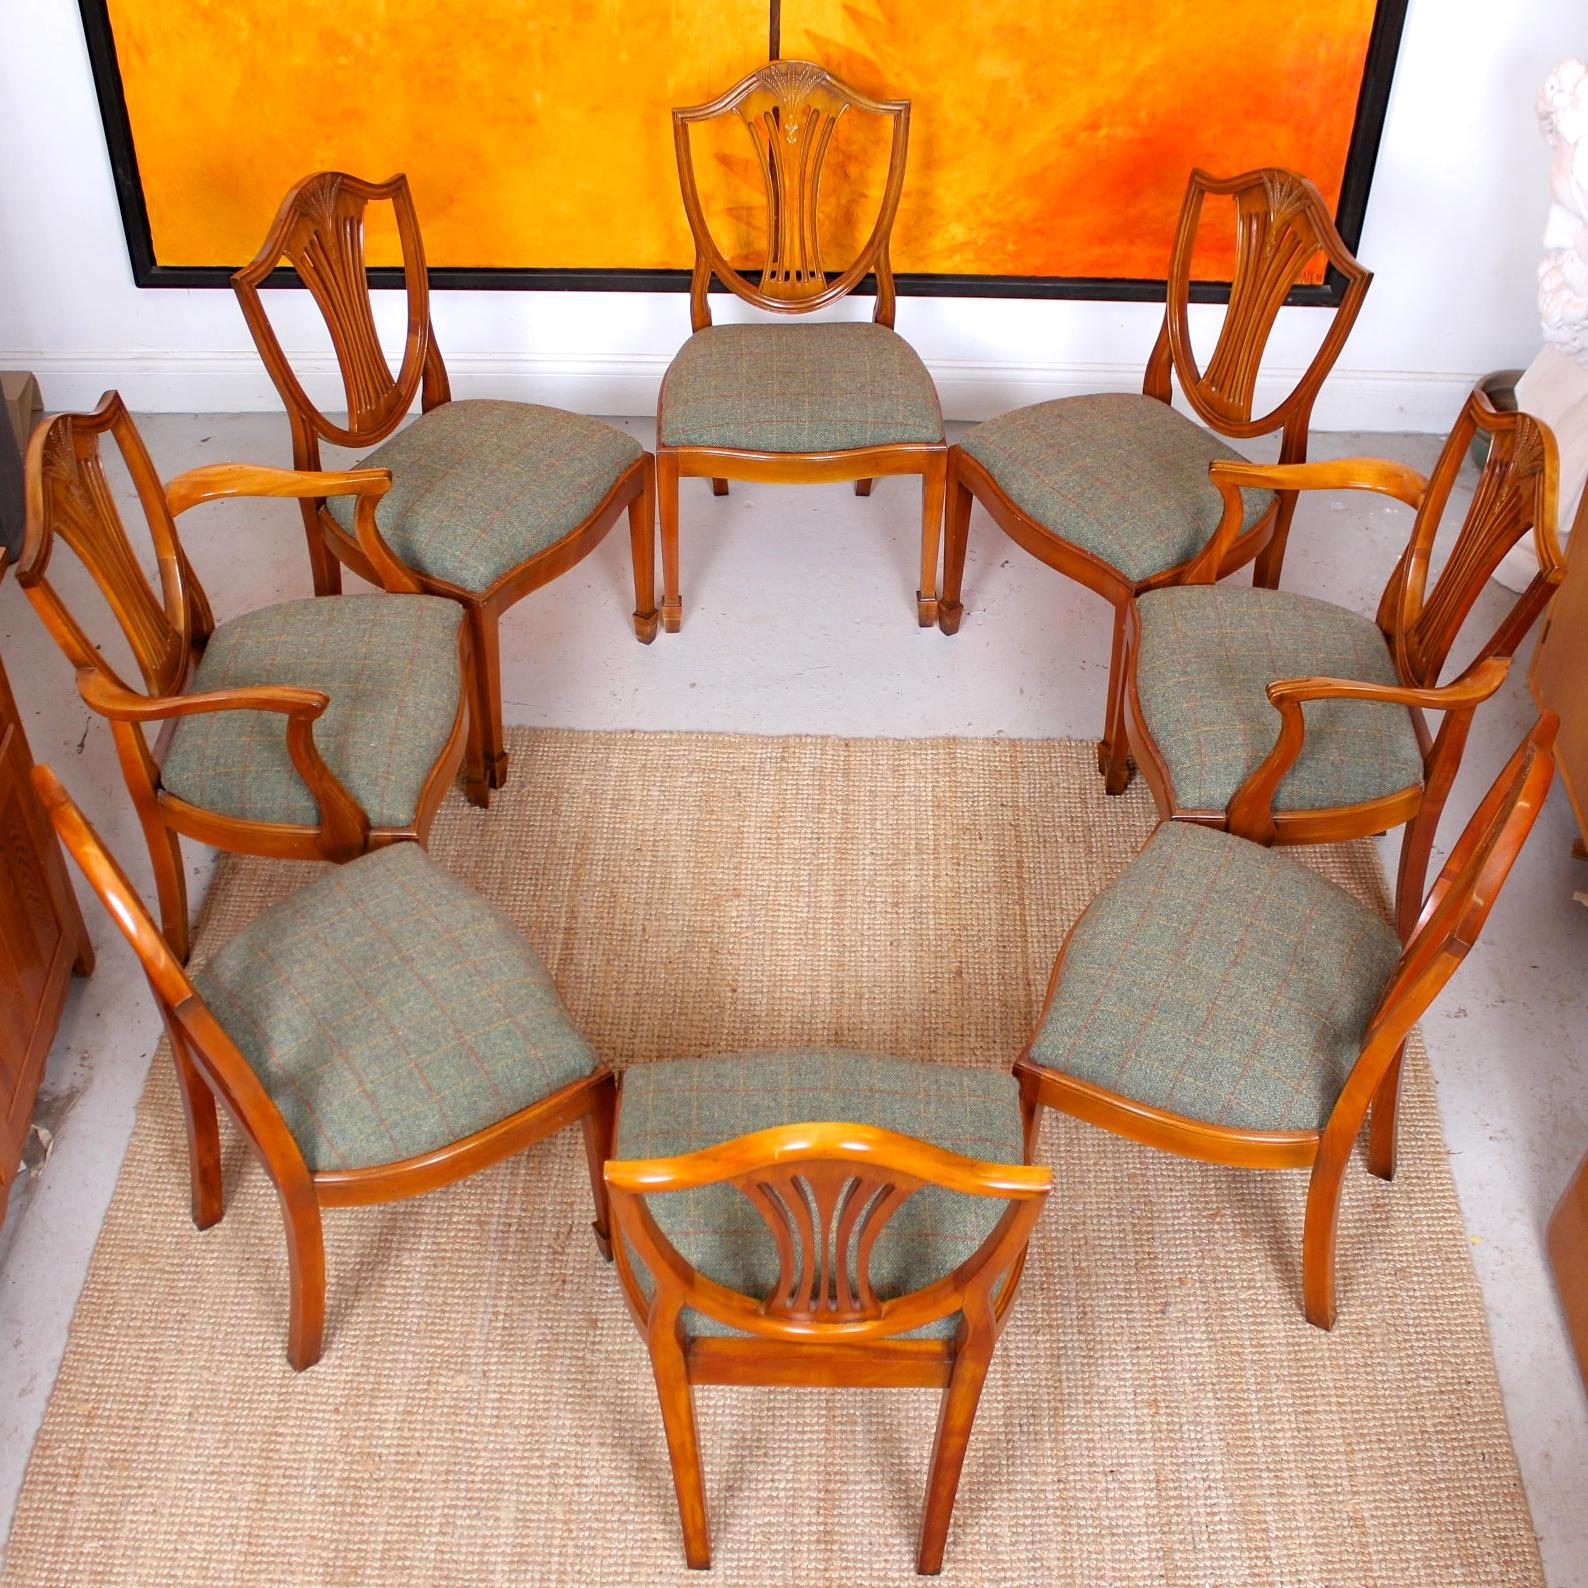 20th Century Charles Barr Yew Dining Table and 8 Chairs Hepplewhite Stalker